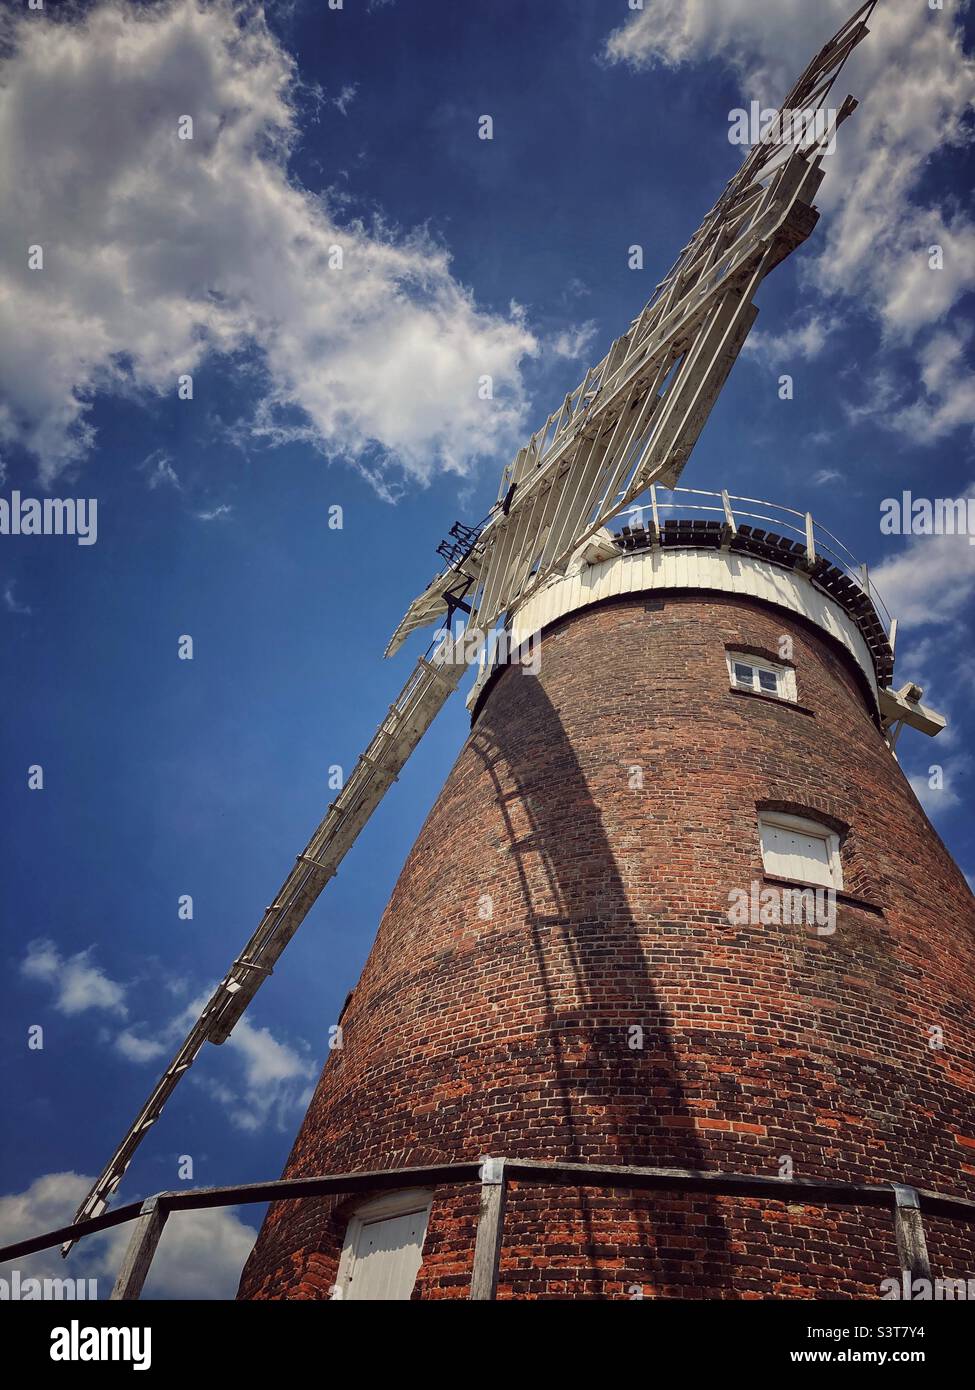 Looking up at the sails of a windmill against the sky. The windmill, known as John Webb’s windmill is located in Thaxted in Essex and was built in 1804 to grind flour. It is no longer a working mill. Stock Photo